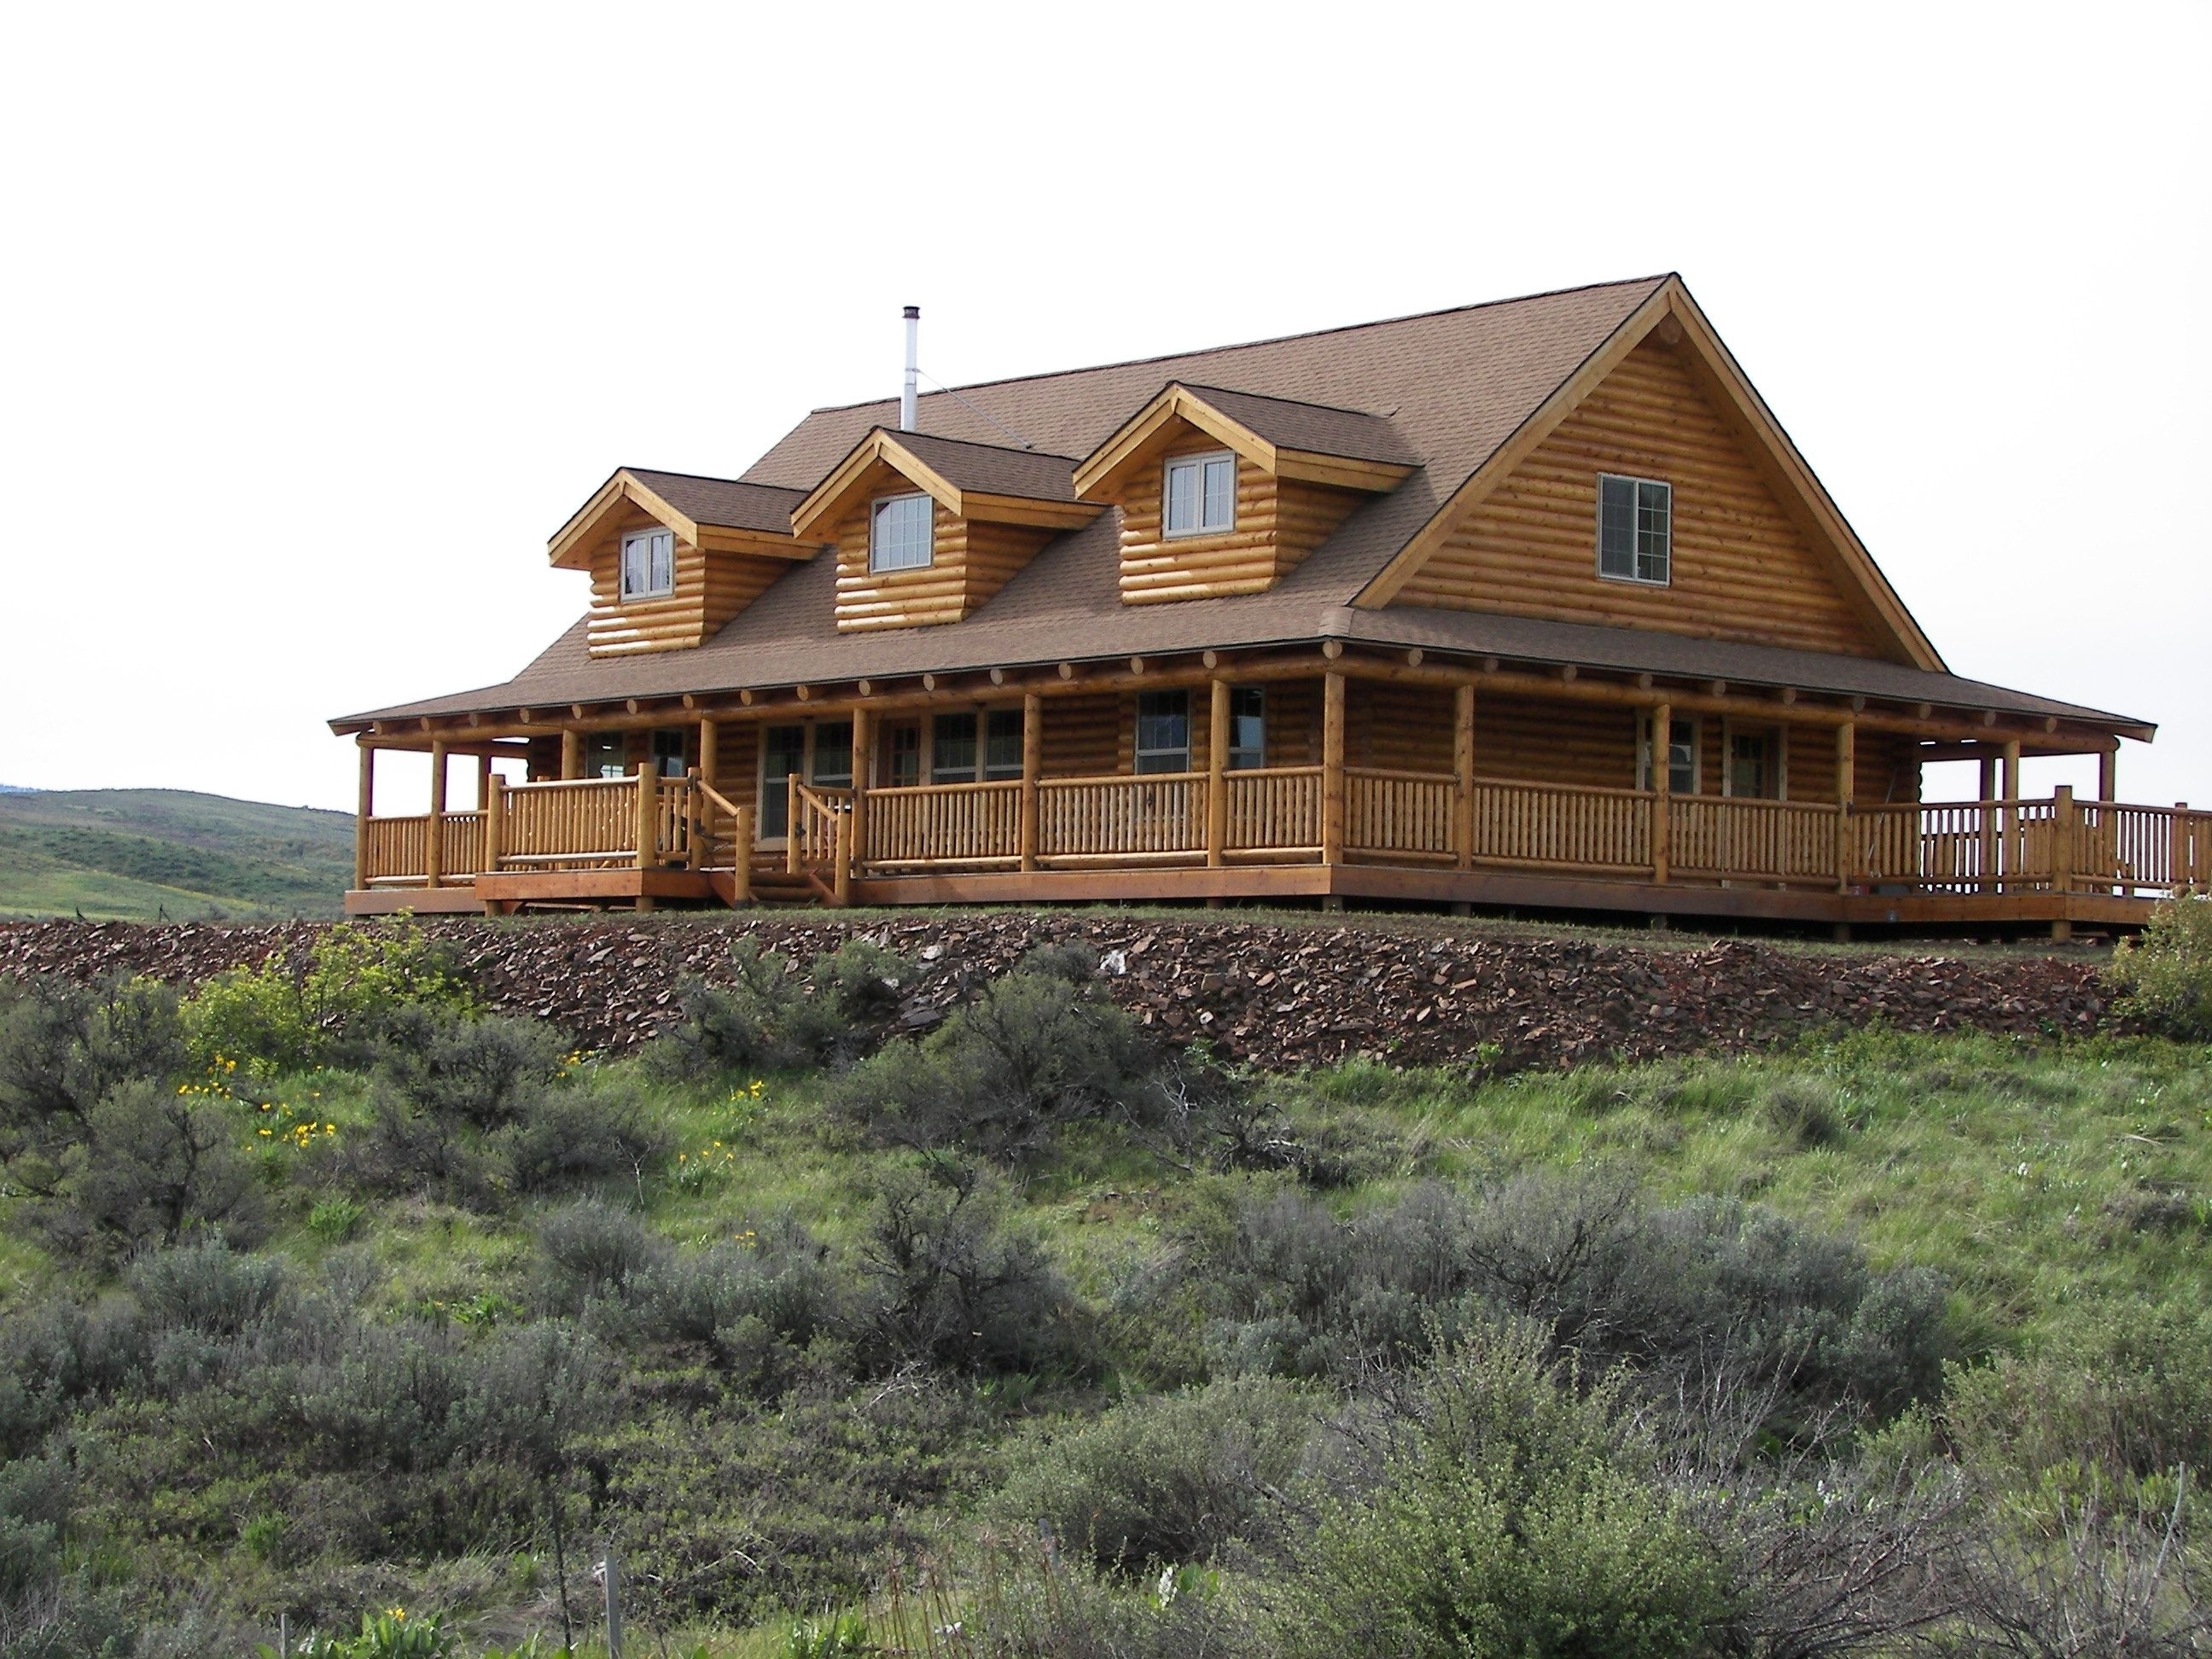 Two Story Log Cabin With Wrap Around Porch